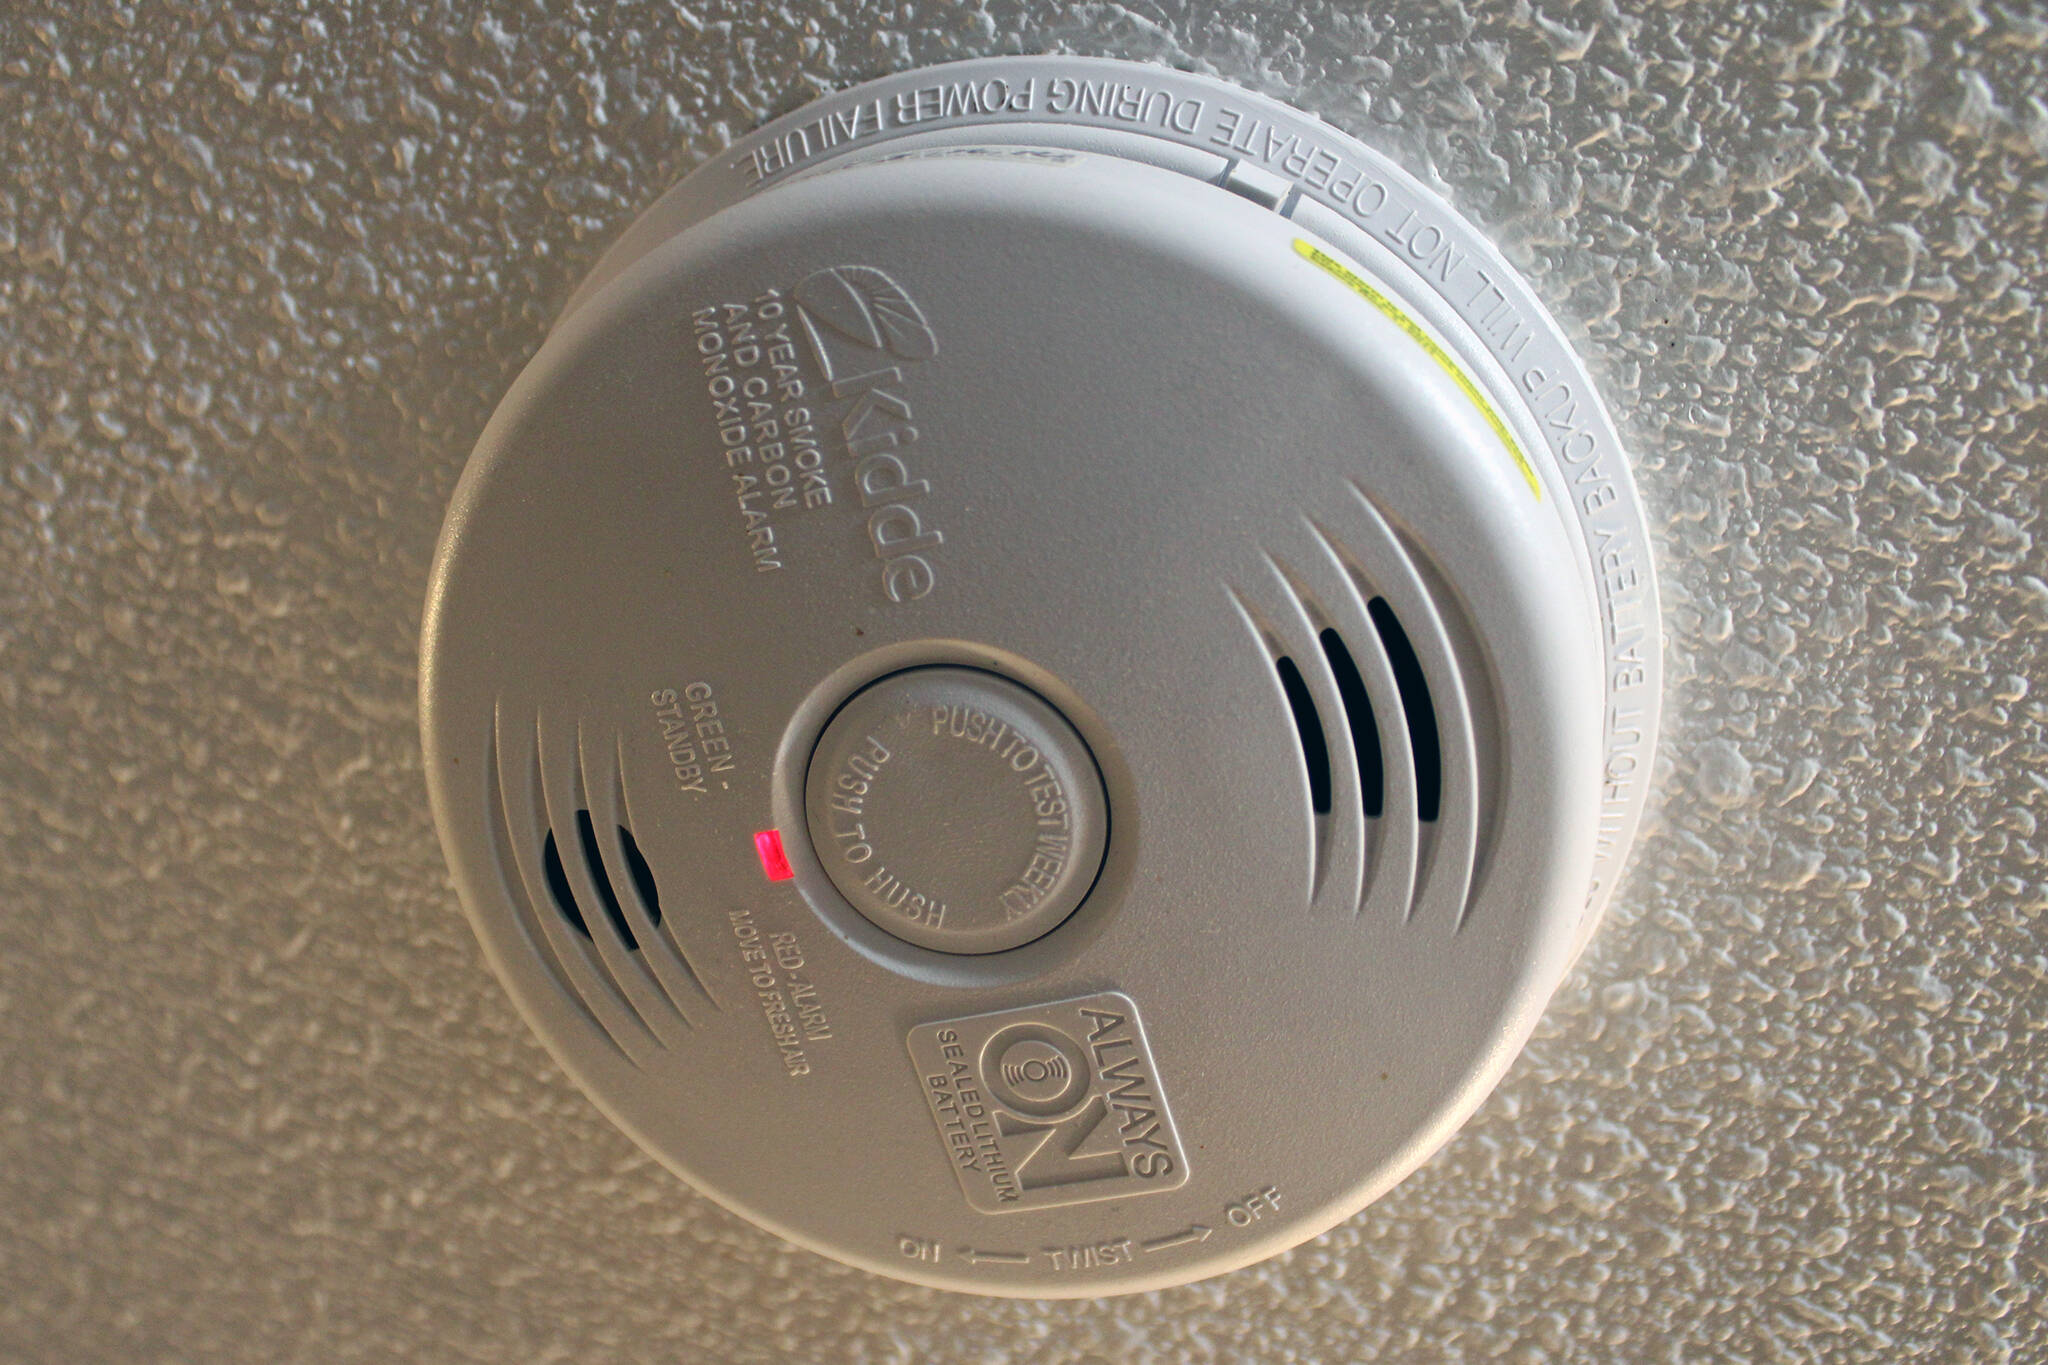 Thanks to a grant awarded to CCFR through State Farm, the department has a large number of smoke alarms on hand for anyone who might not already have one or the one they have is faulty. Firefighters are available to drop them off at people’s home if need be. (Ben Hohenstatt / Juneau Empire File)